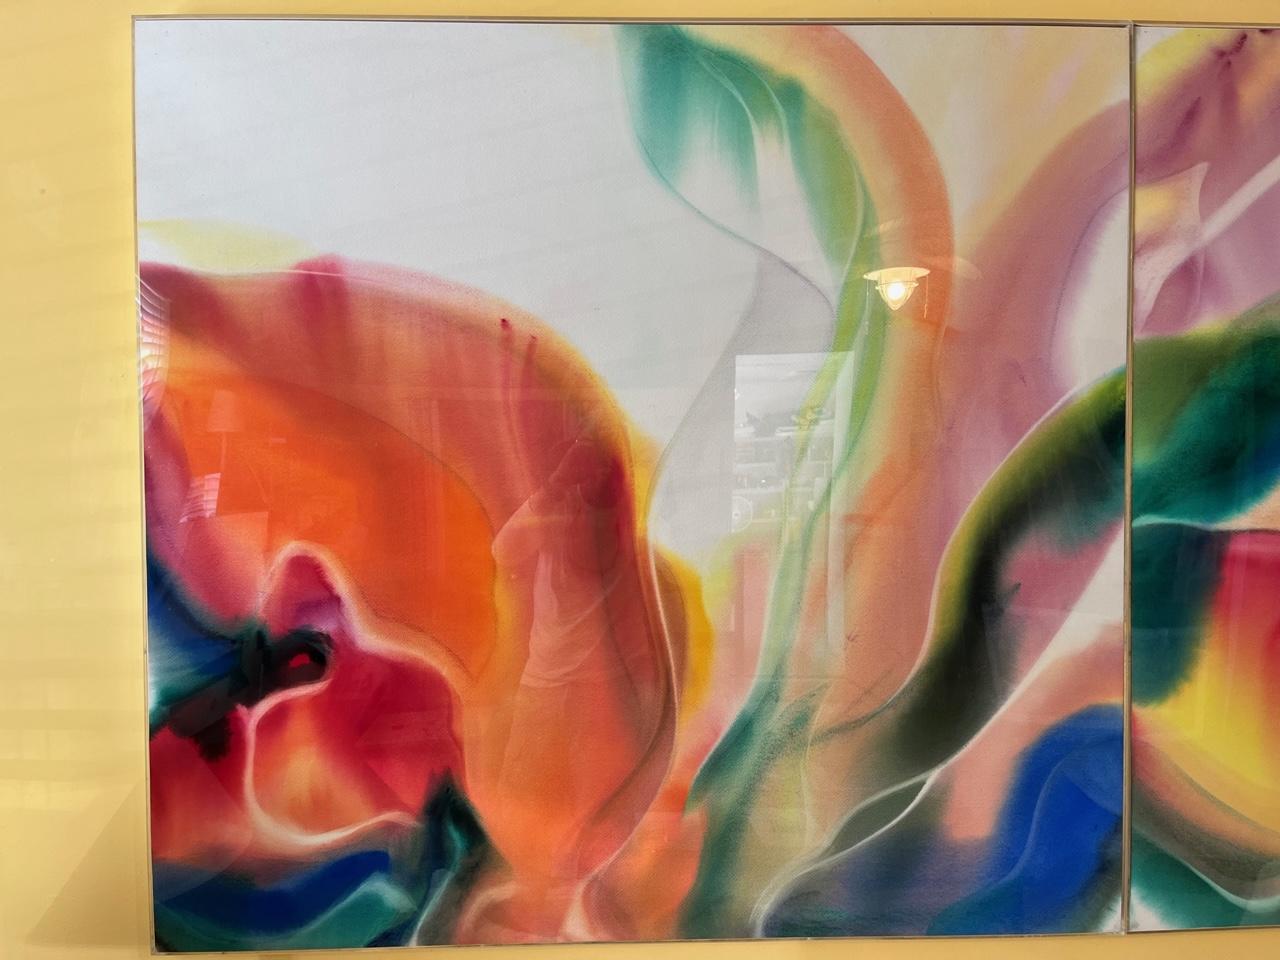  Diptych Large Abstract Painting On paper
Abstract watercolor on French Arches rag paper artist signed. Framed under plexiglass.
Frank Monaco.
Studied and worked with Marilyn Stiles of The Art Institute of Chicago/ Art History
Painting, Museum